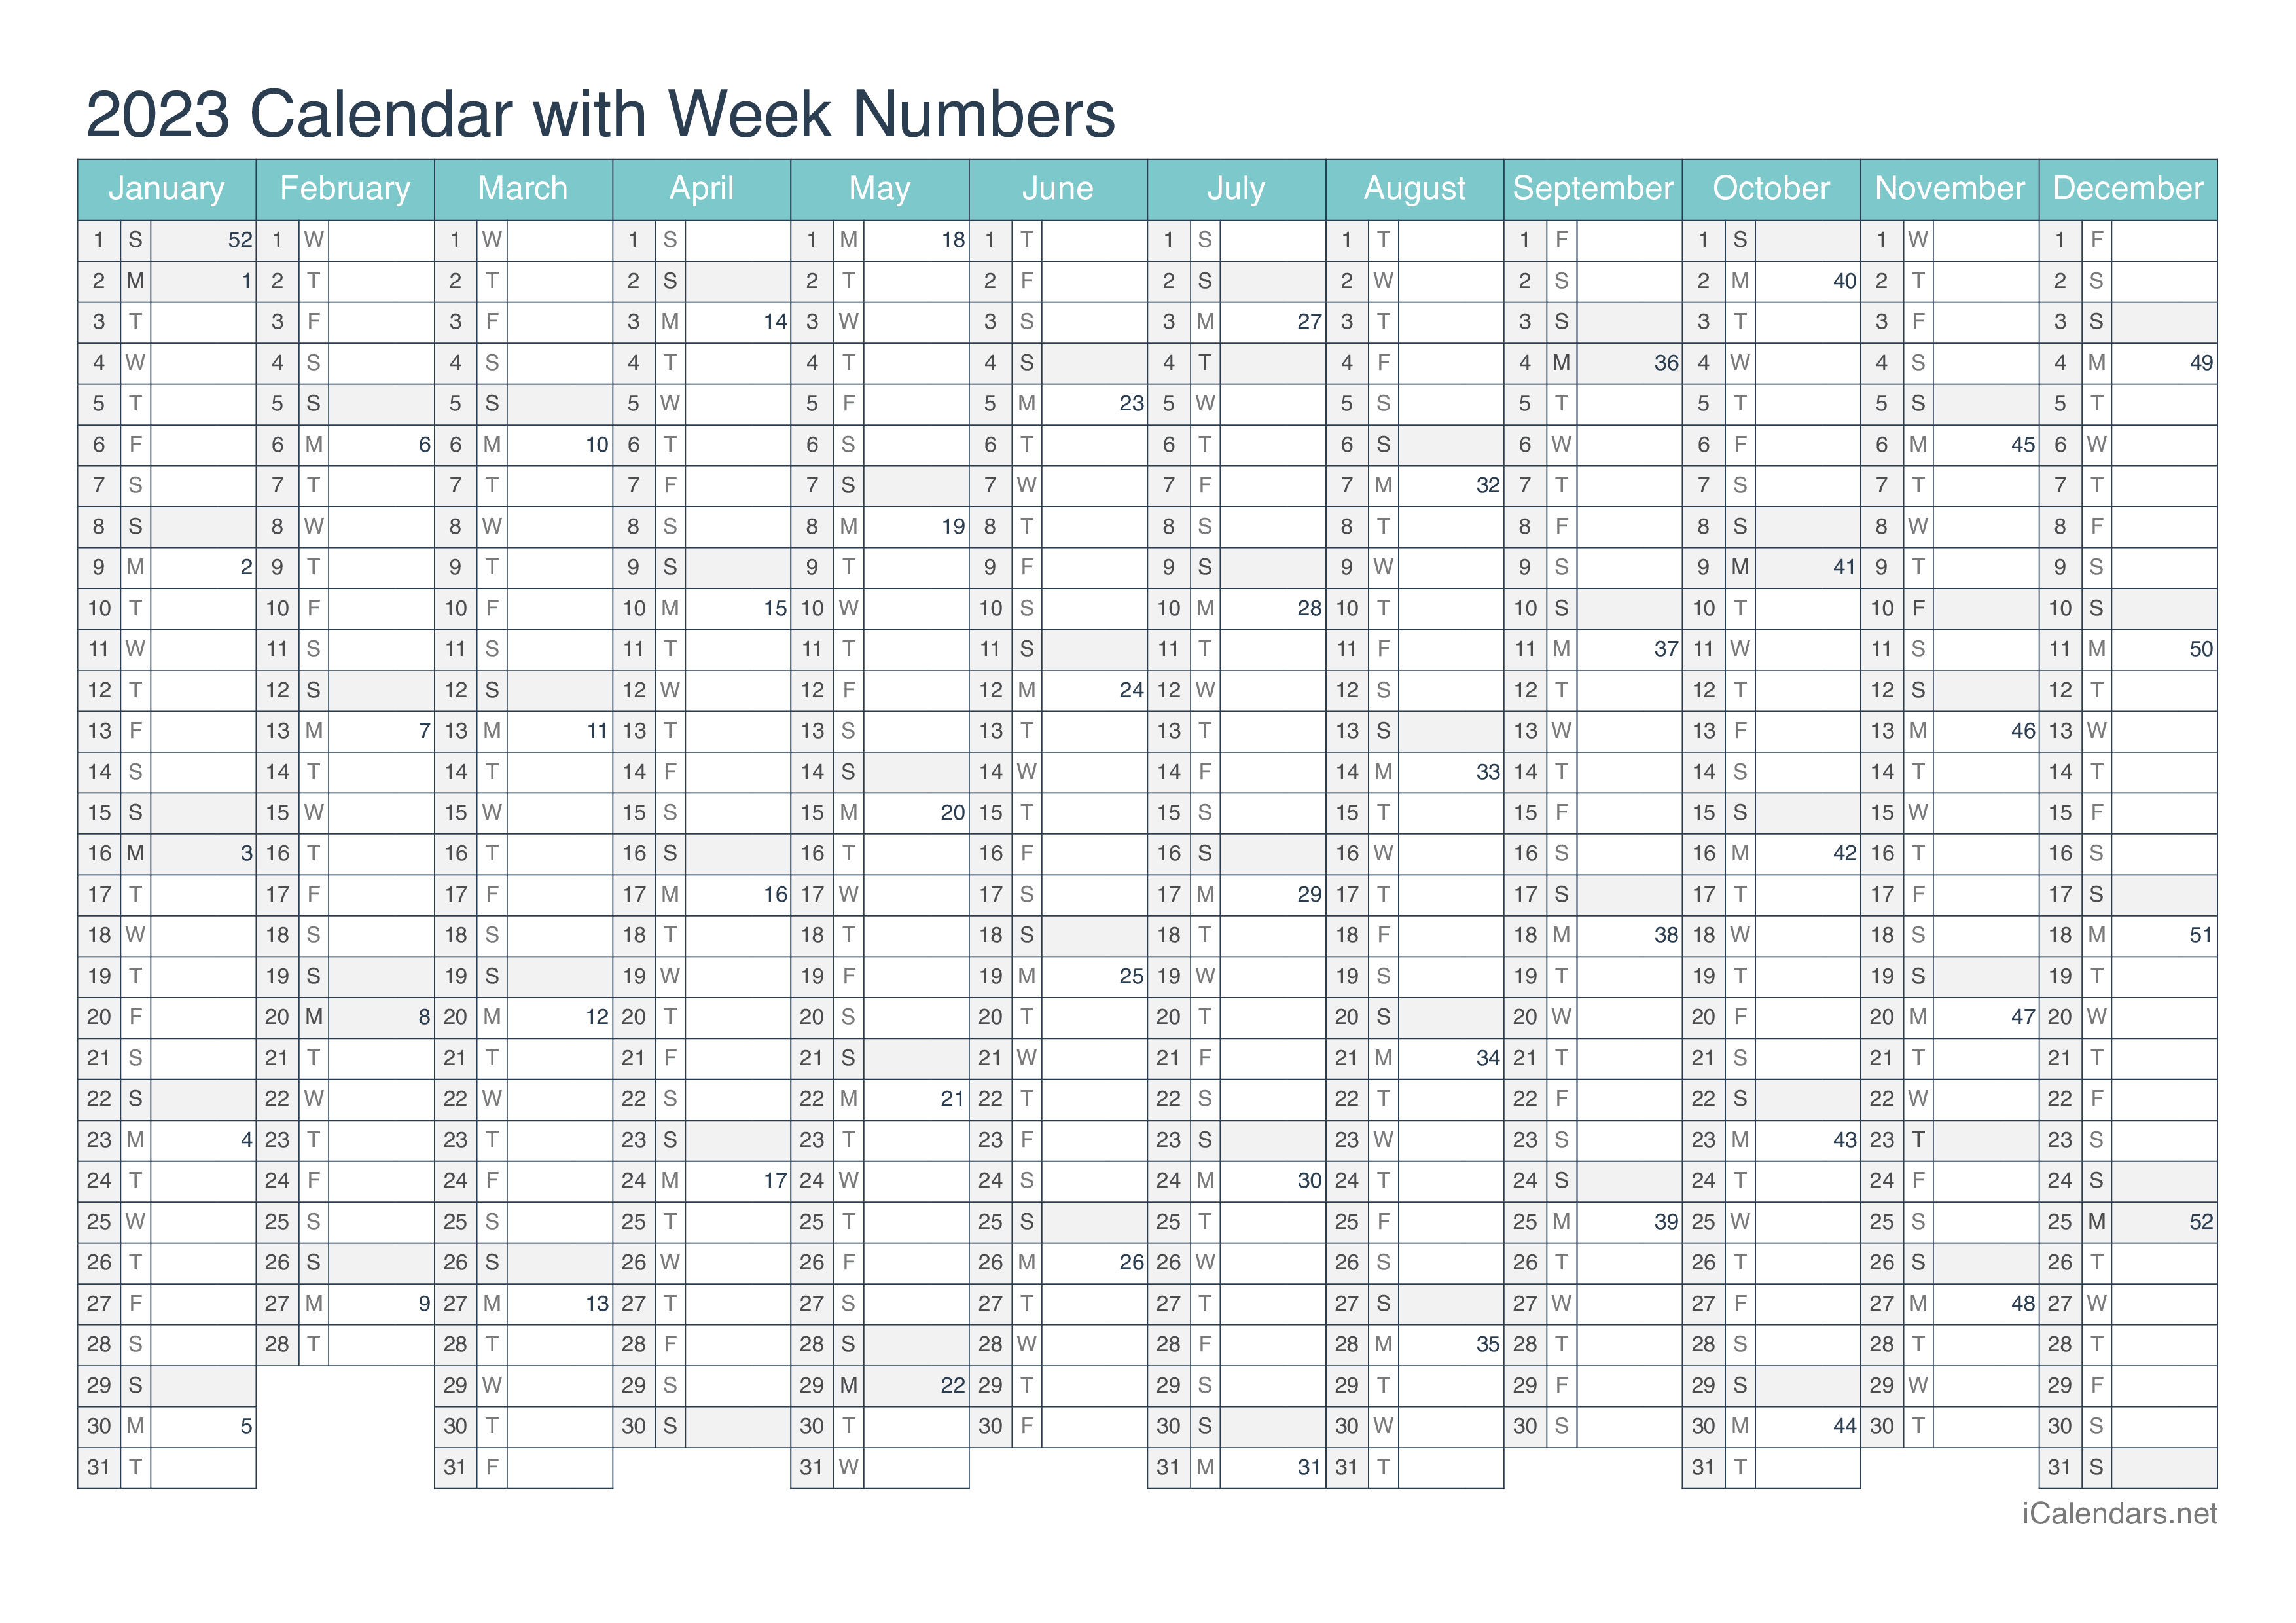 2023 Calendar with week numbers - Turquoise